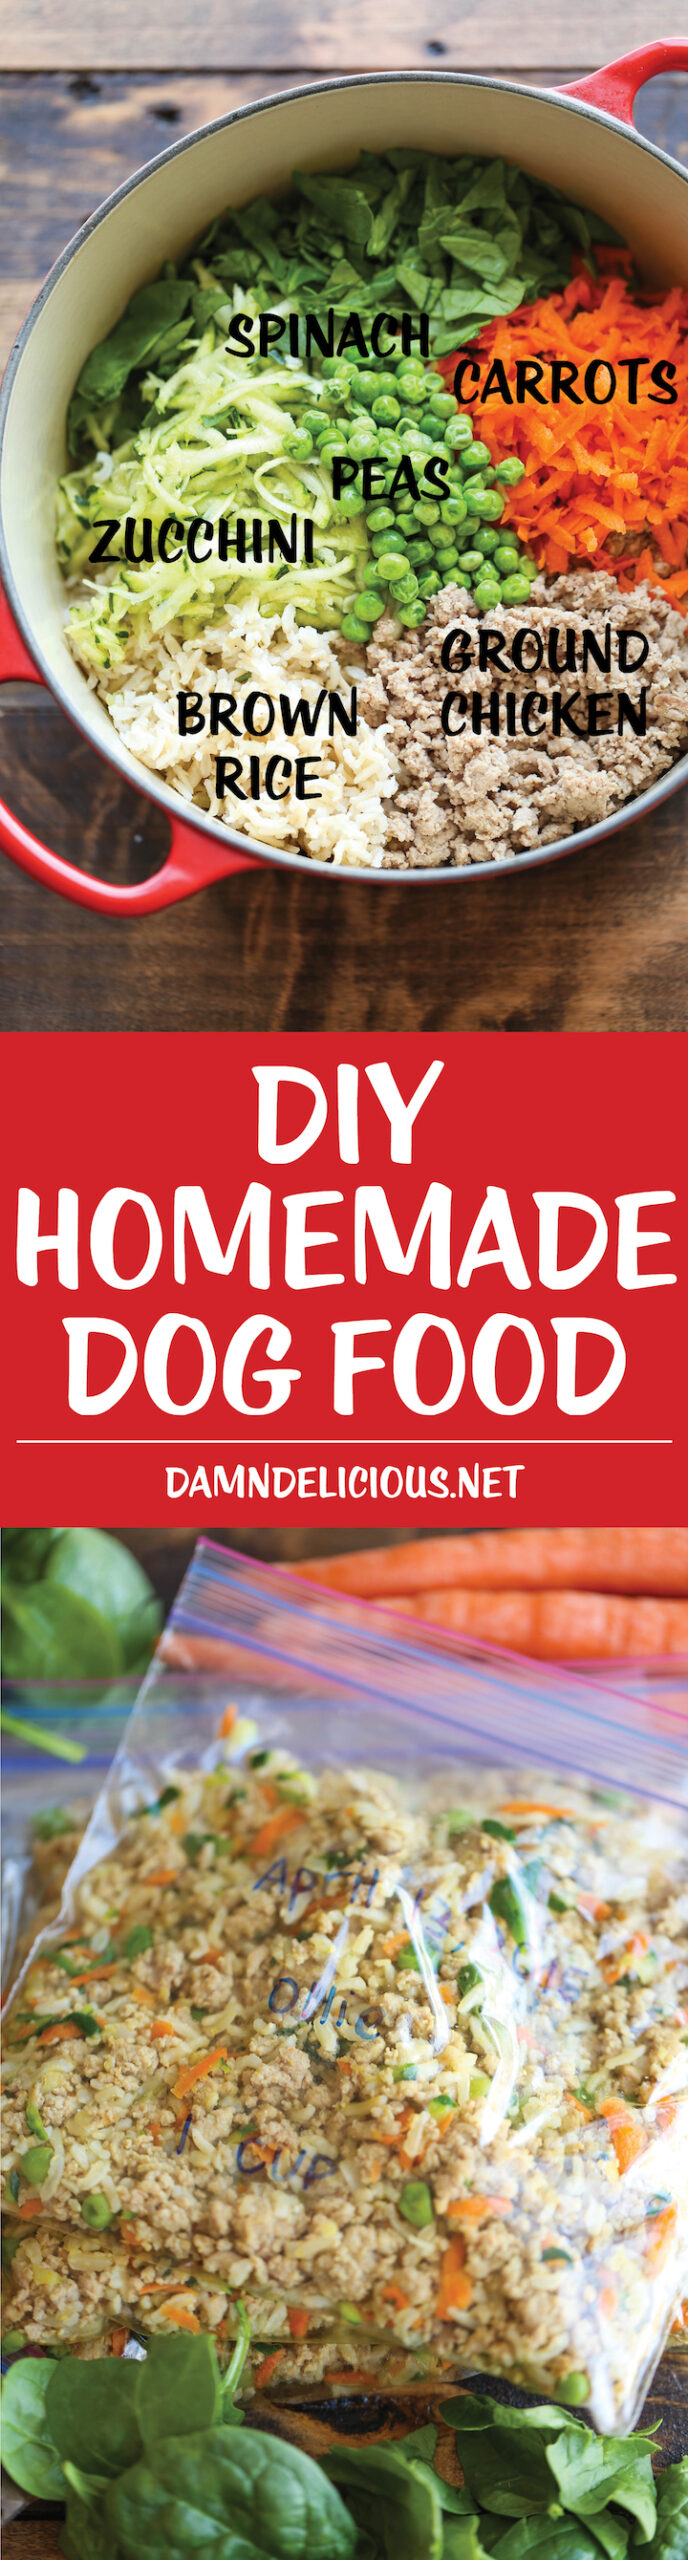 healthy-homemade-dog-food-grain-free-recipes-your-dog-will-love-scaled.jpg